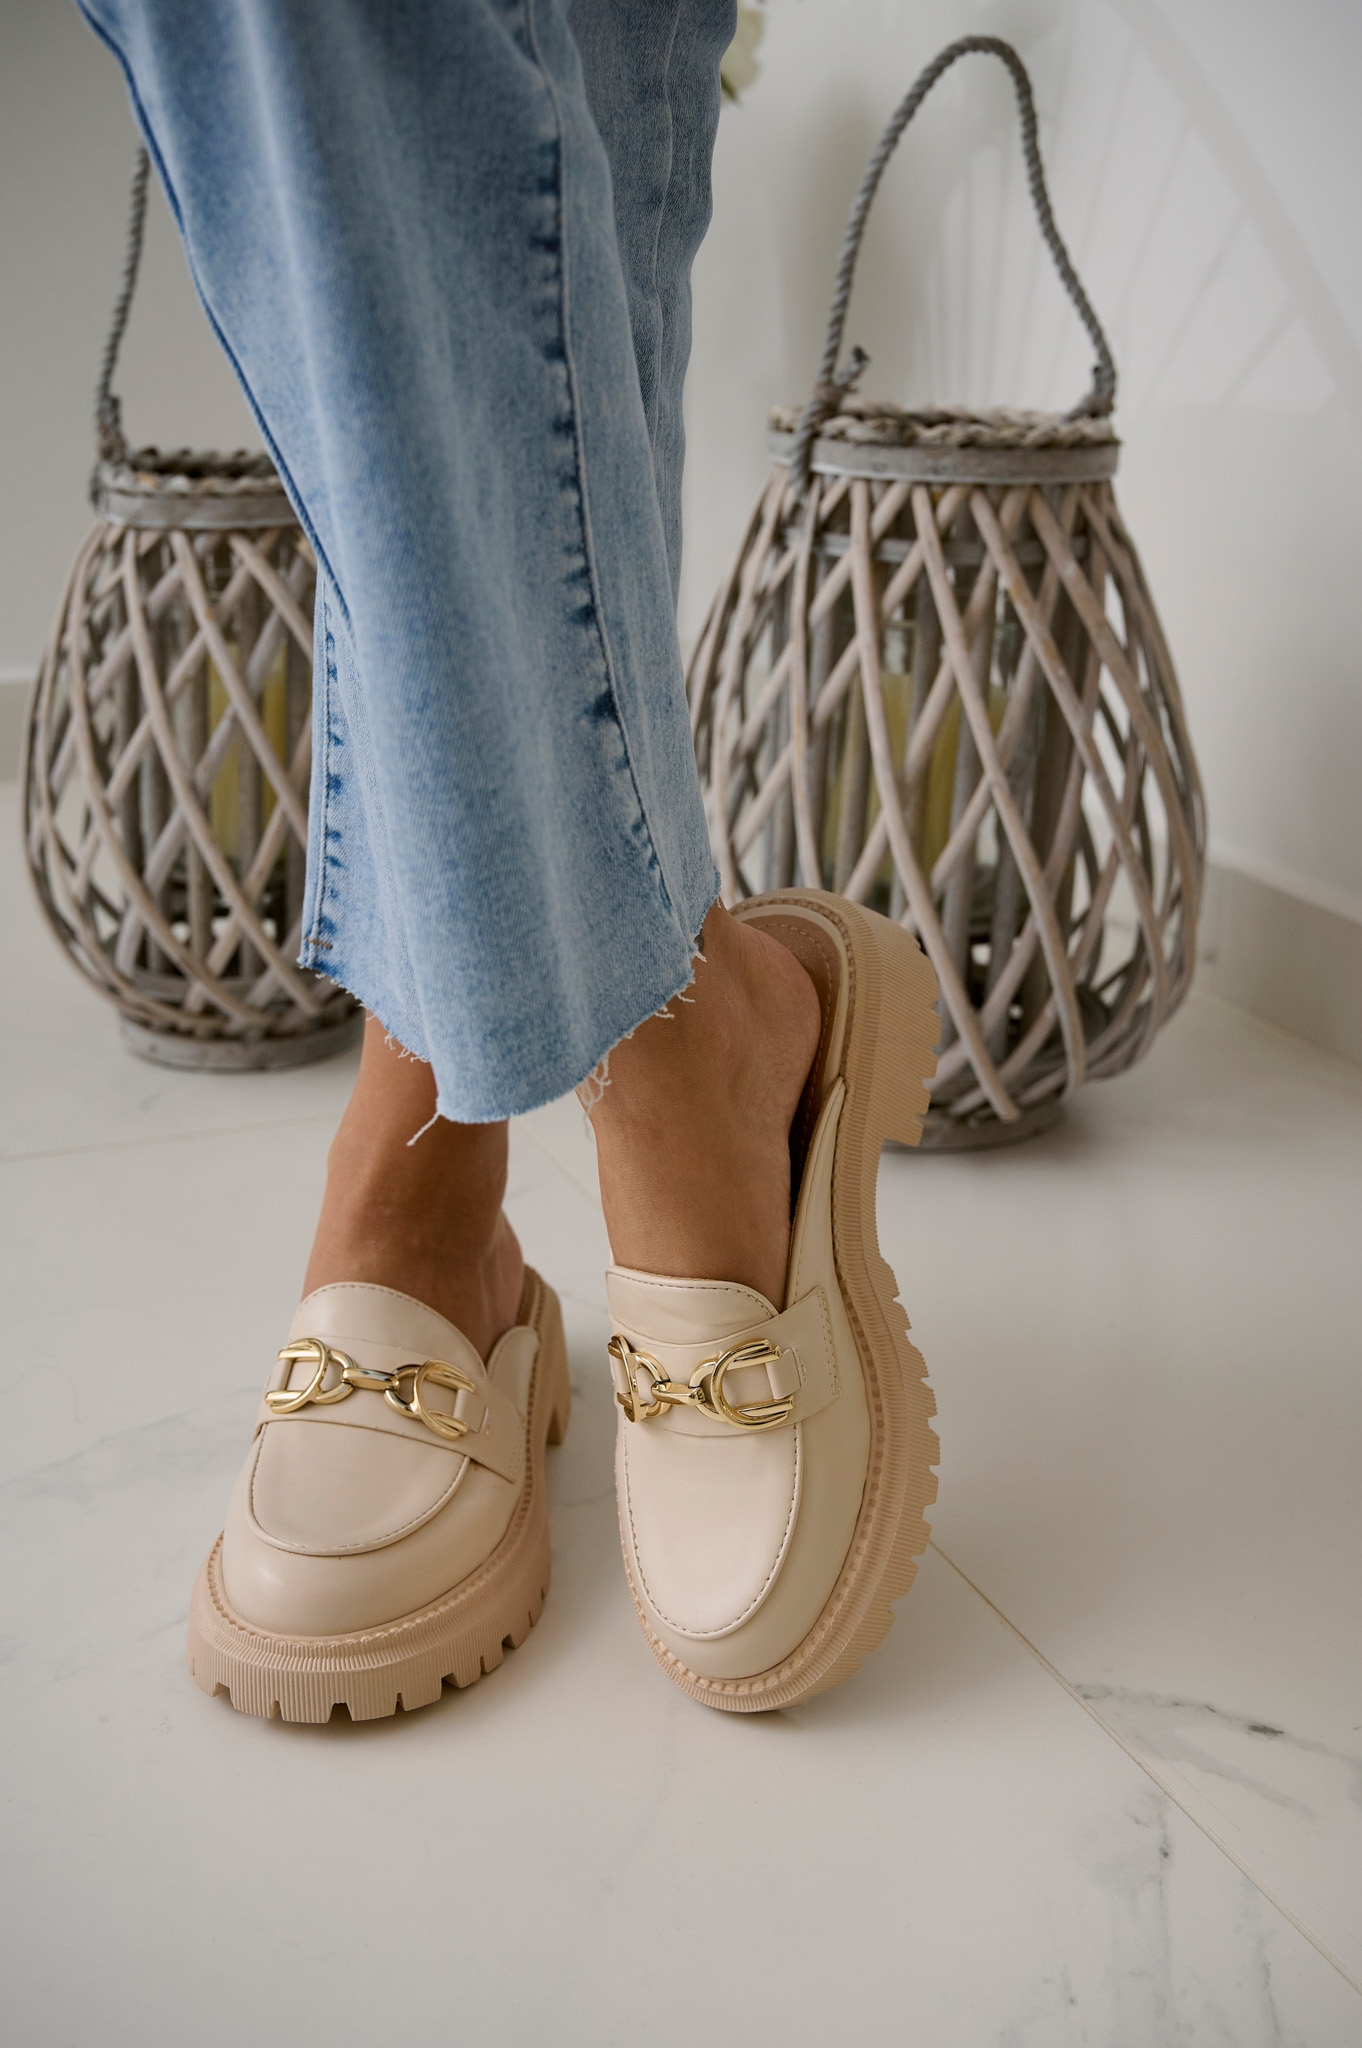 Slingback Loafers With Golden Buckle